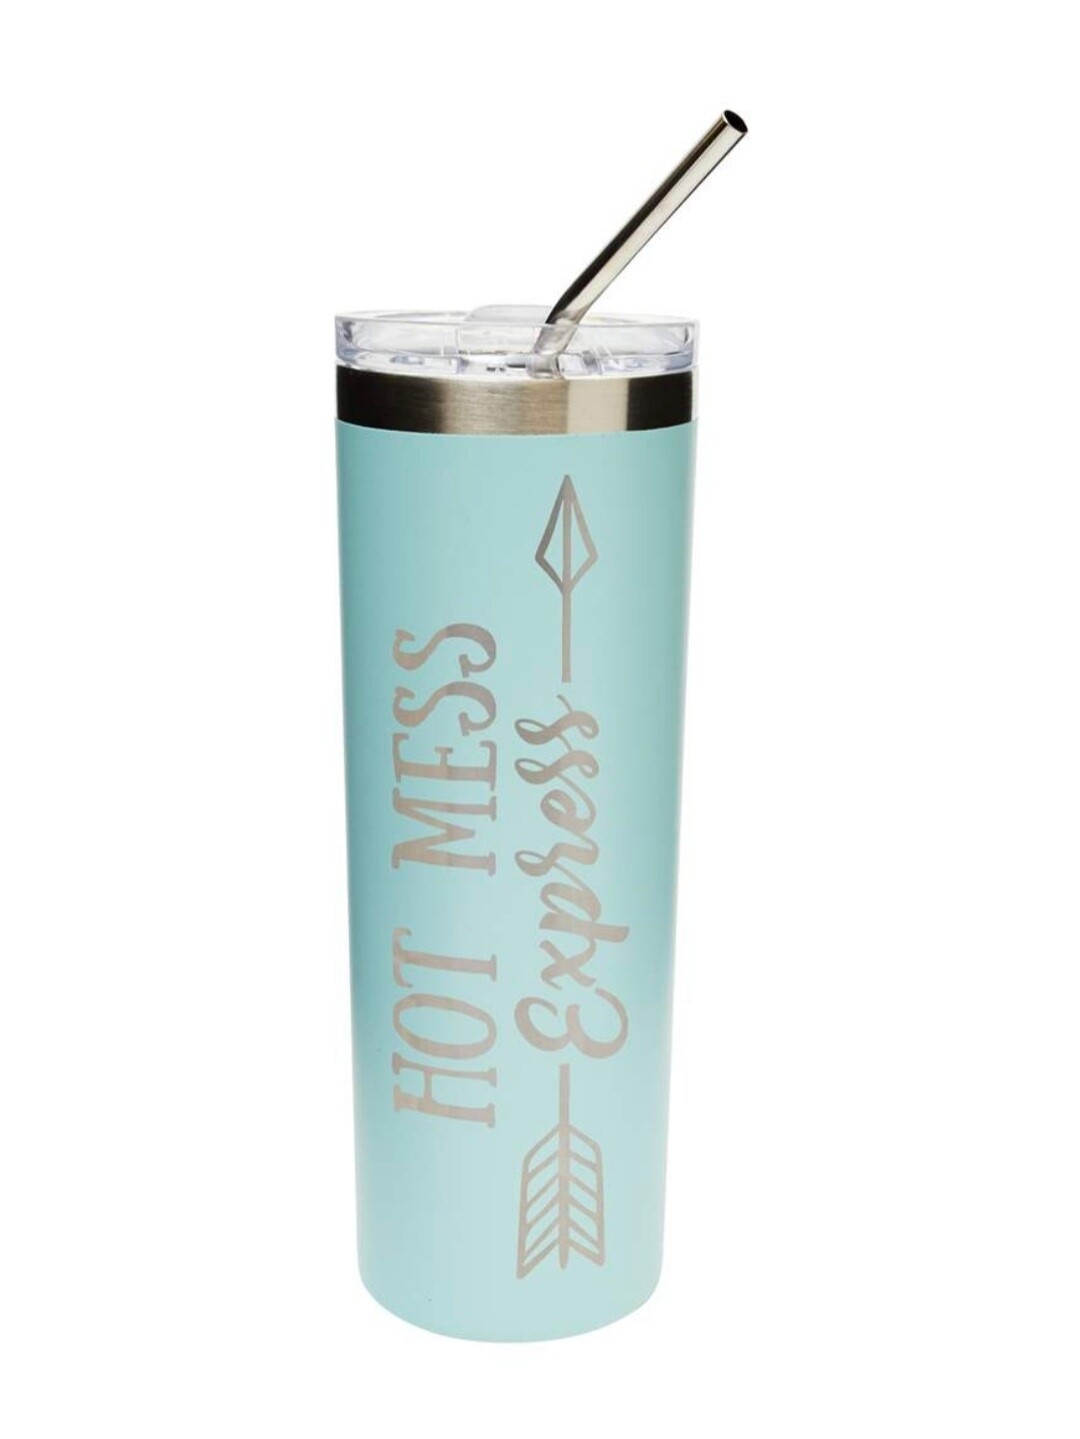 Carson 23oz Stainless Steel Tumbler - Hot Mess Express